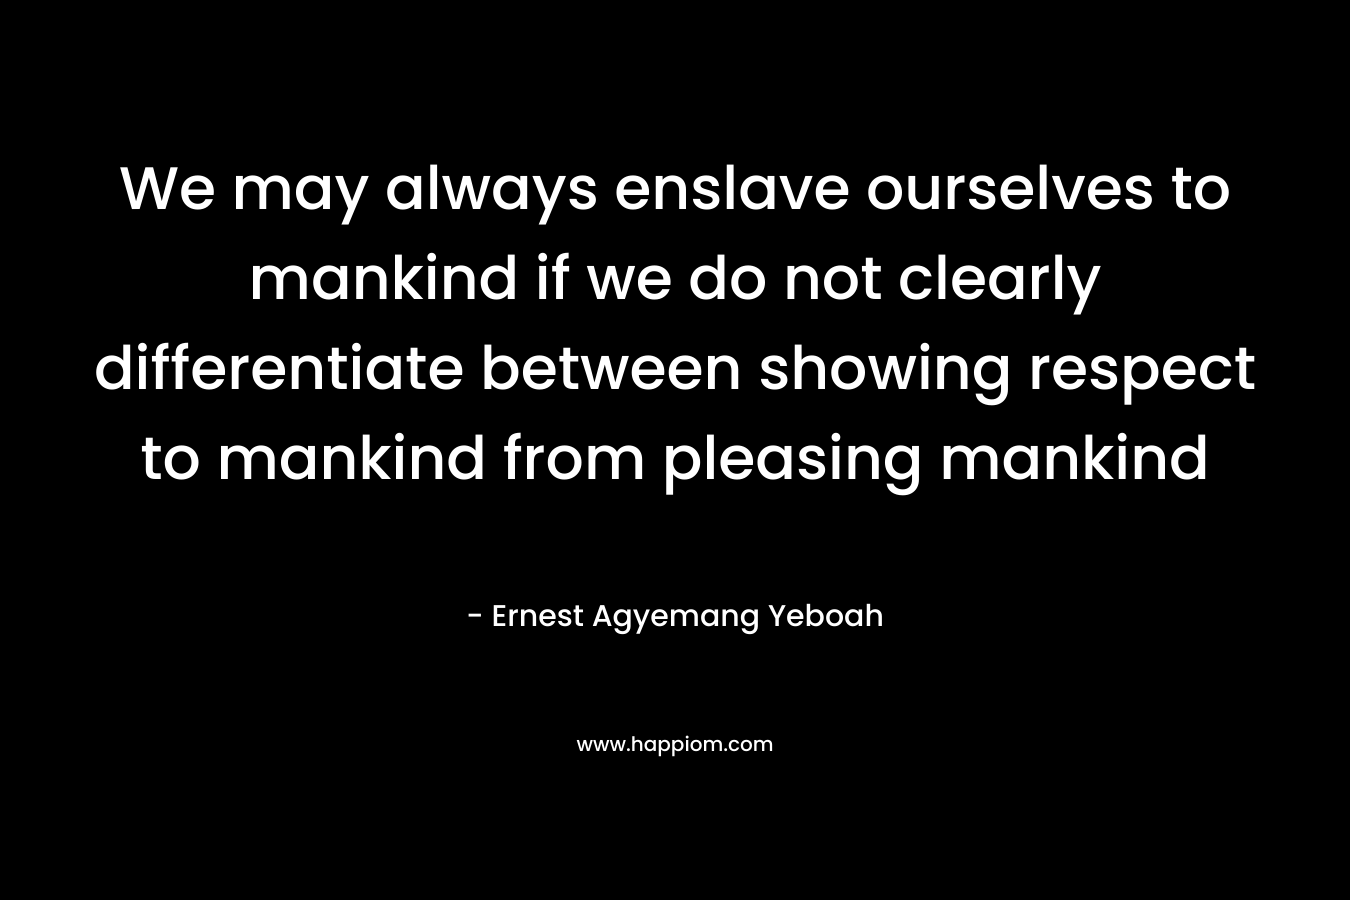 We may always enslave ourselves to mankind if we do not clearly differentiate between showing respect to mankind from pleasing mankind – Ernest Agyemang Yeboah